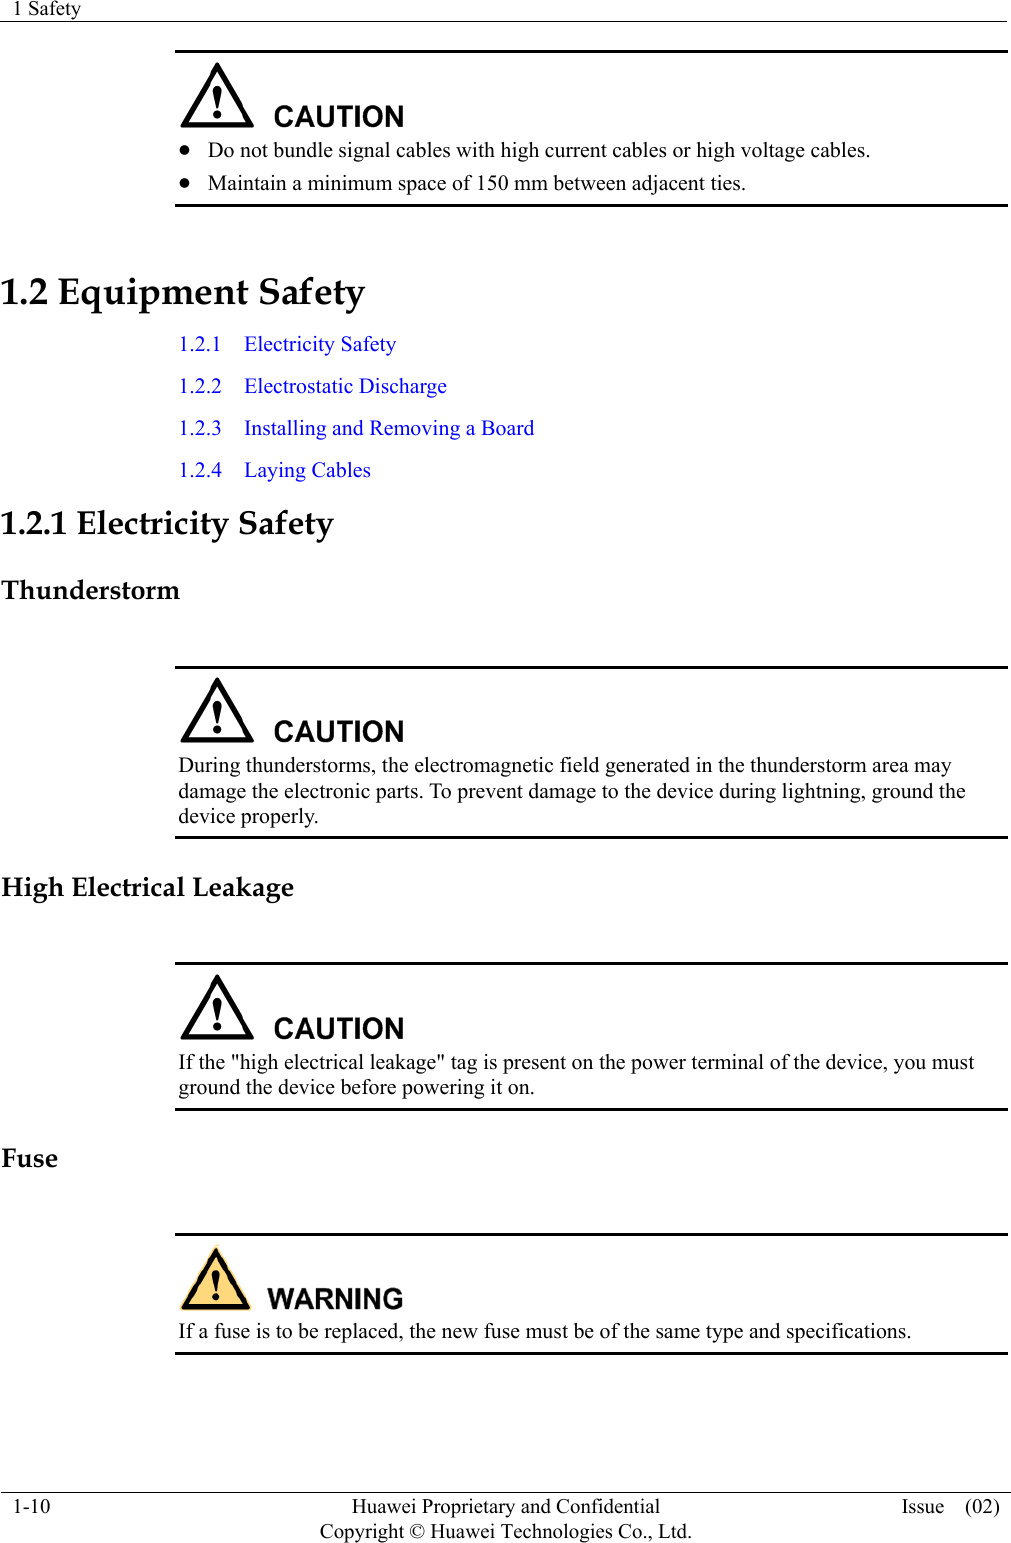 1 Safety  1-10  Huawei Proprietary and Confidential         Copyright © Huawei Technologies Co., Ltd.Issue  (02)  z Do not bundle signal cables with high current cables or high voltage cables. z Maintain a minimum space of 150 mm between adjacent ties. 1.2 Equipment Safety 1.2.1  Electricity Safety 1.2.2  Electrostatic Discharge 1.2.3  Installing and Removing a Board 1.2.4  Laying Cables 1.2.1 Electricity Safety Thunderstorm   During thunderstorms, the electromagnetic field generated in the thunderstorm area may damage the electronic parts. To prevent damage to the device during lightning, ground the device properly. High Electrical Leakage   If the &quot;high electrical leakage&quot; tag is present on the power terminal of the device, you must ground the device before powering it on. Fuse   If a fuse is to be replaced, the new fuse must be of the same type and specifications.  